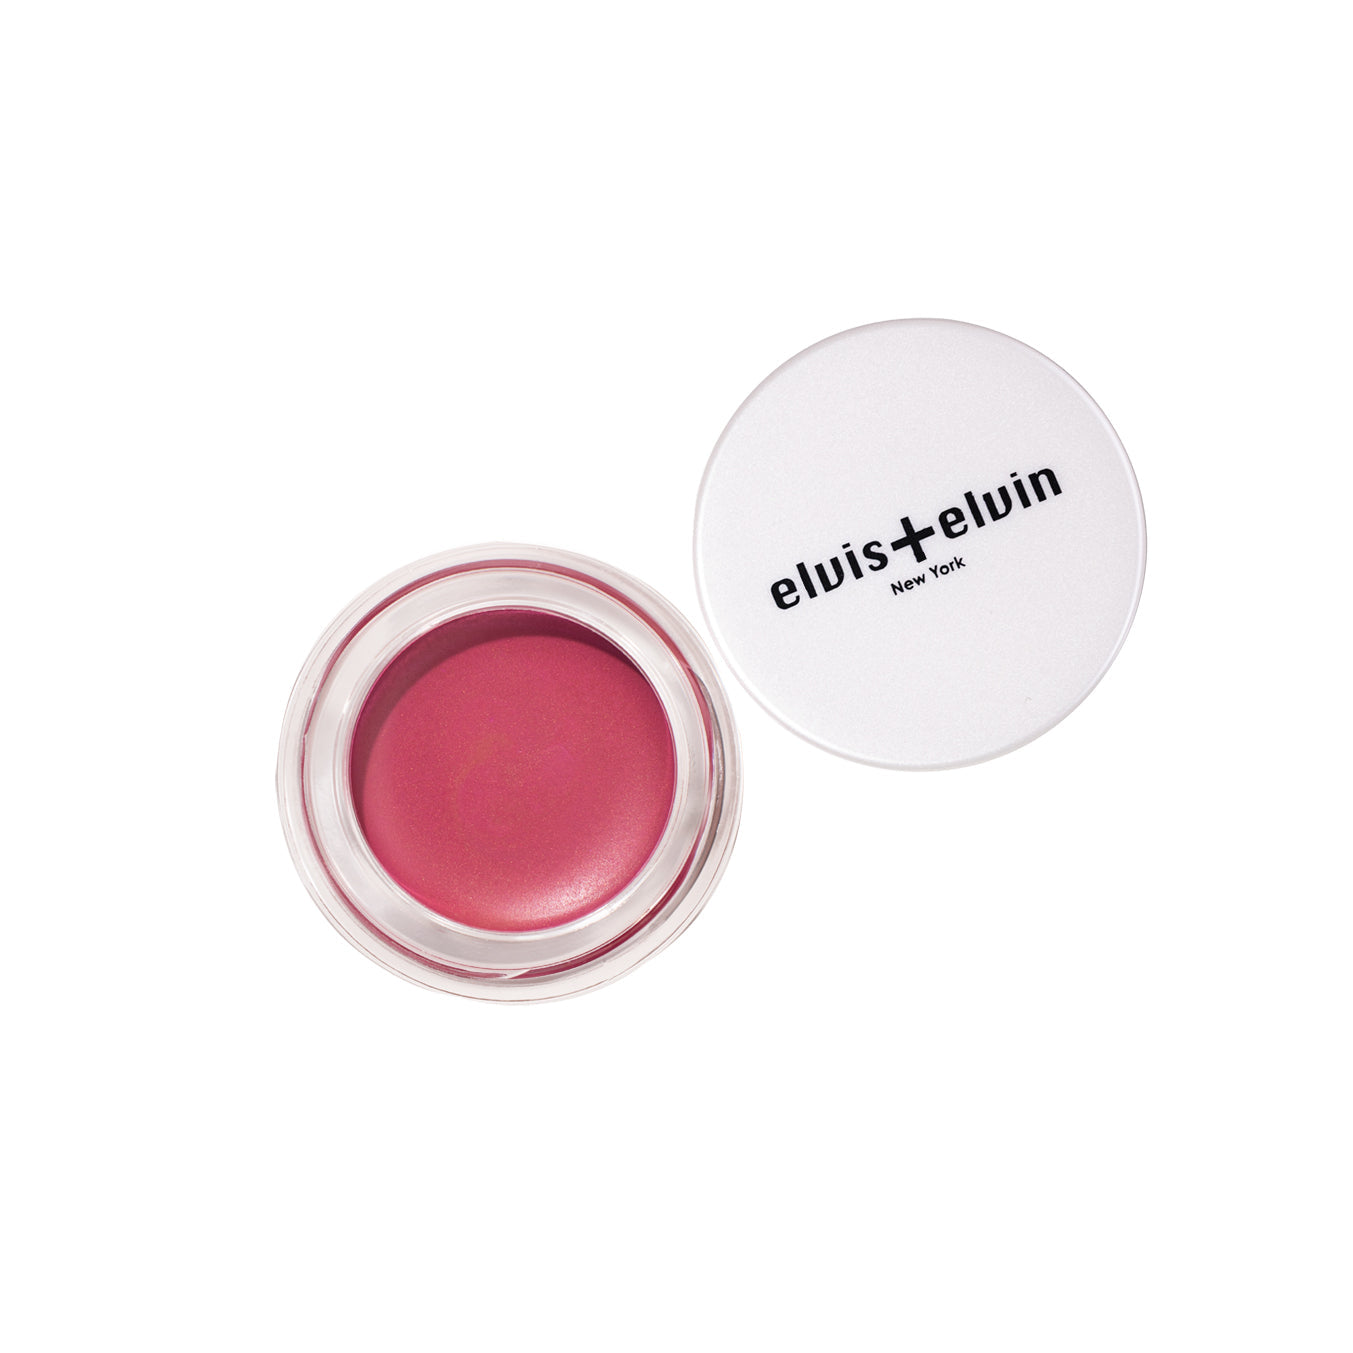 Floral Silky Cream Blush （2023 New color） by elvis+elvin